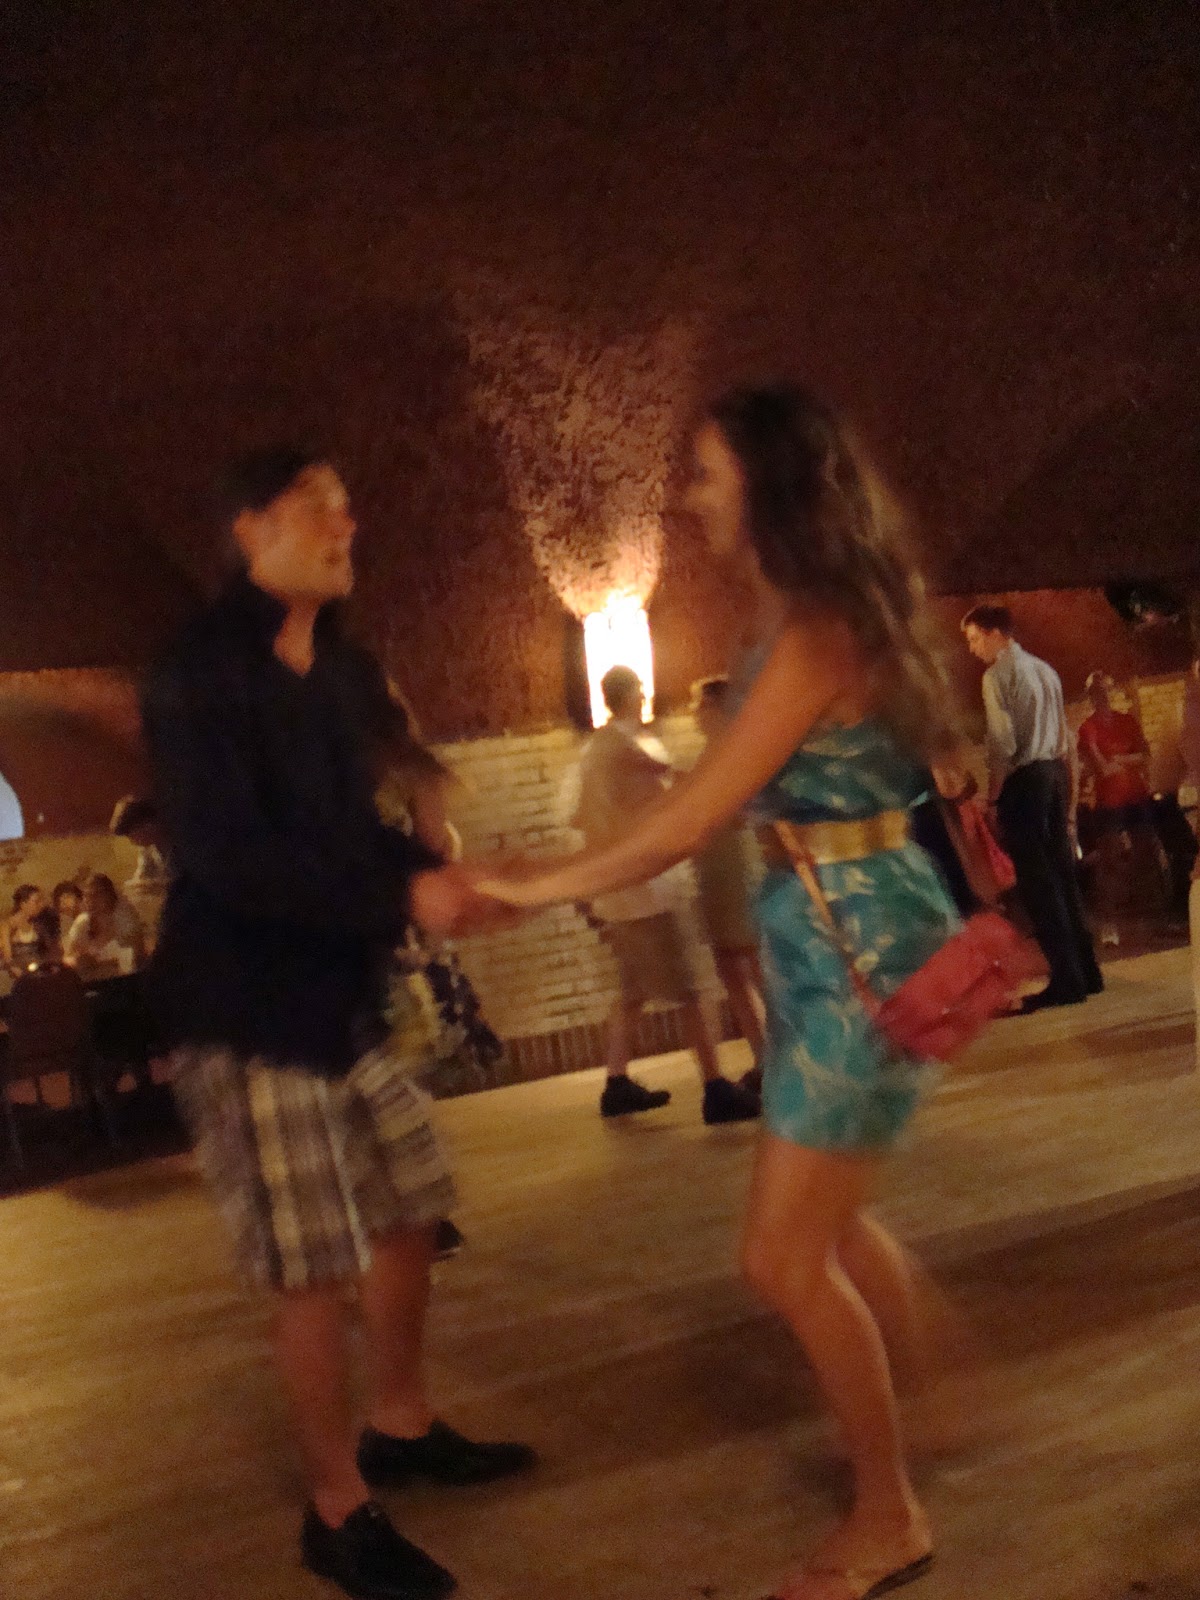 Swing dancing at the Wabasha Street Caves in St. Paul, MN with cousins ...